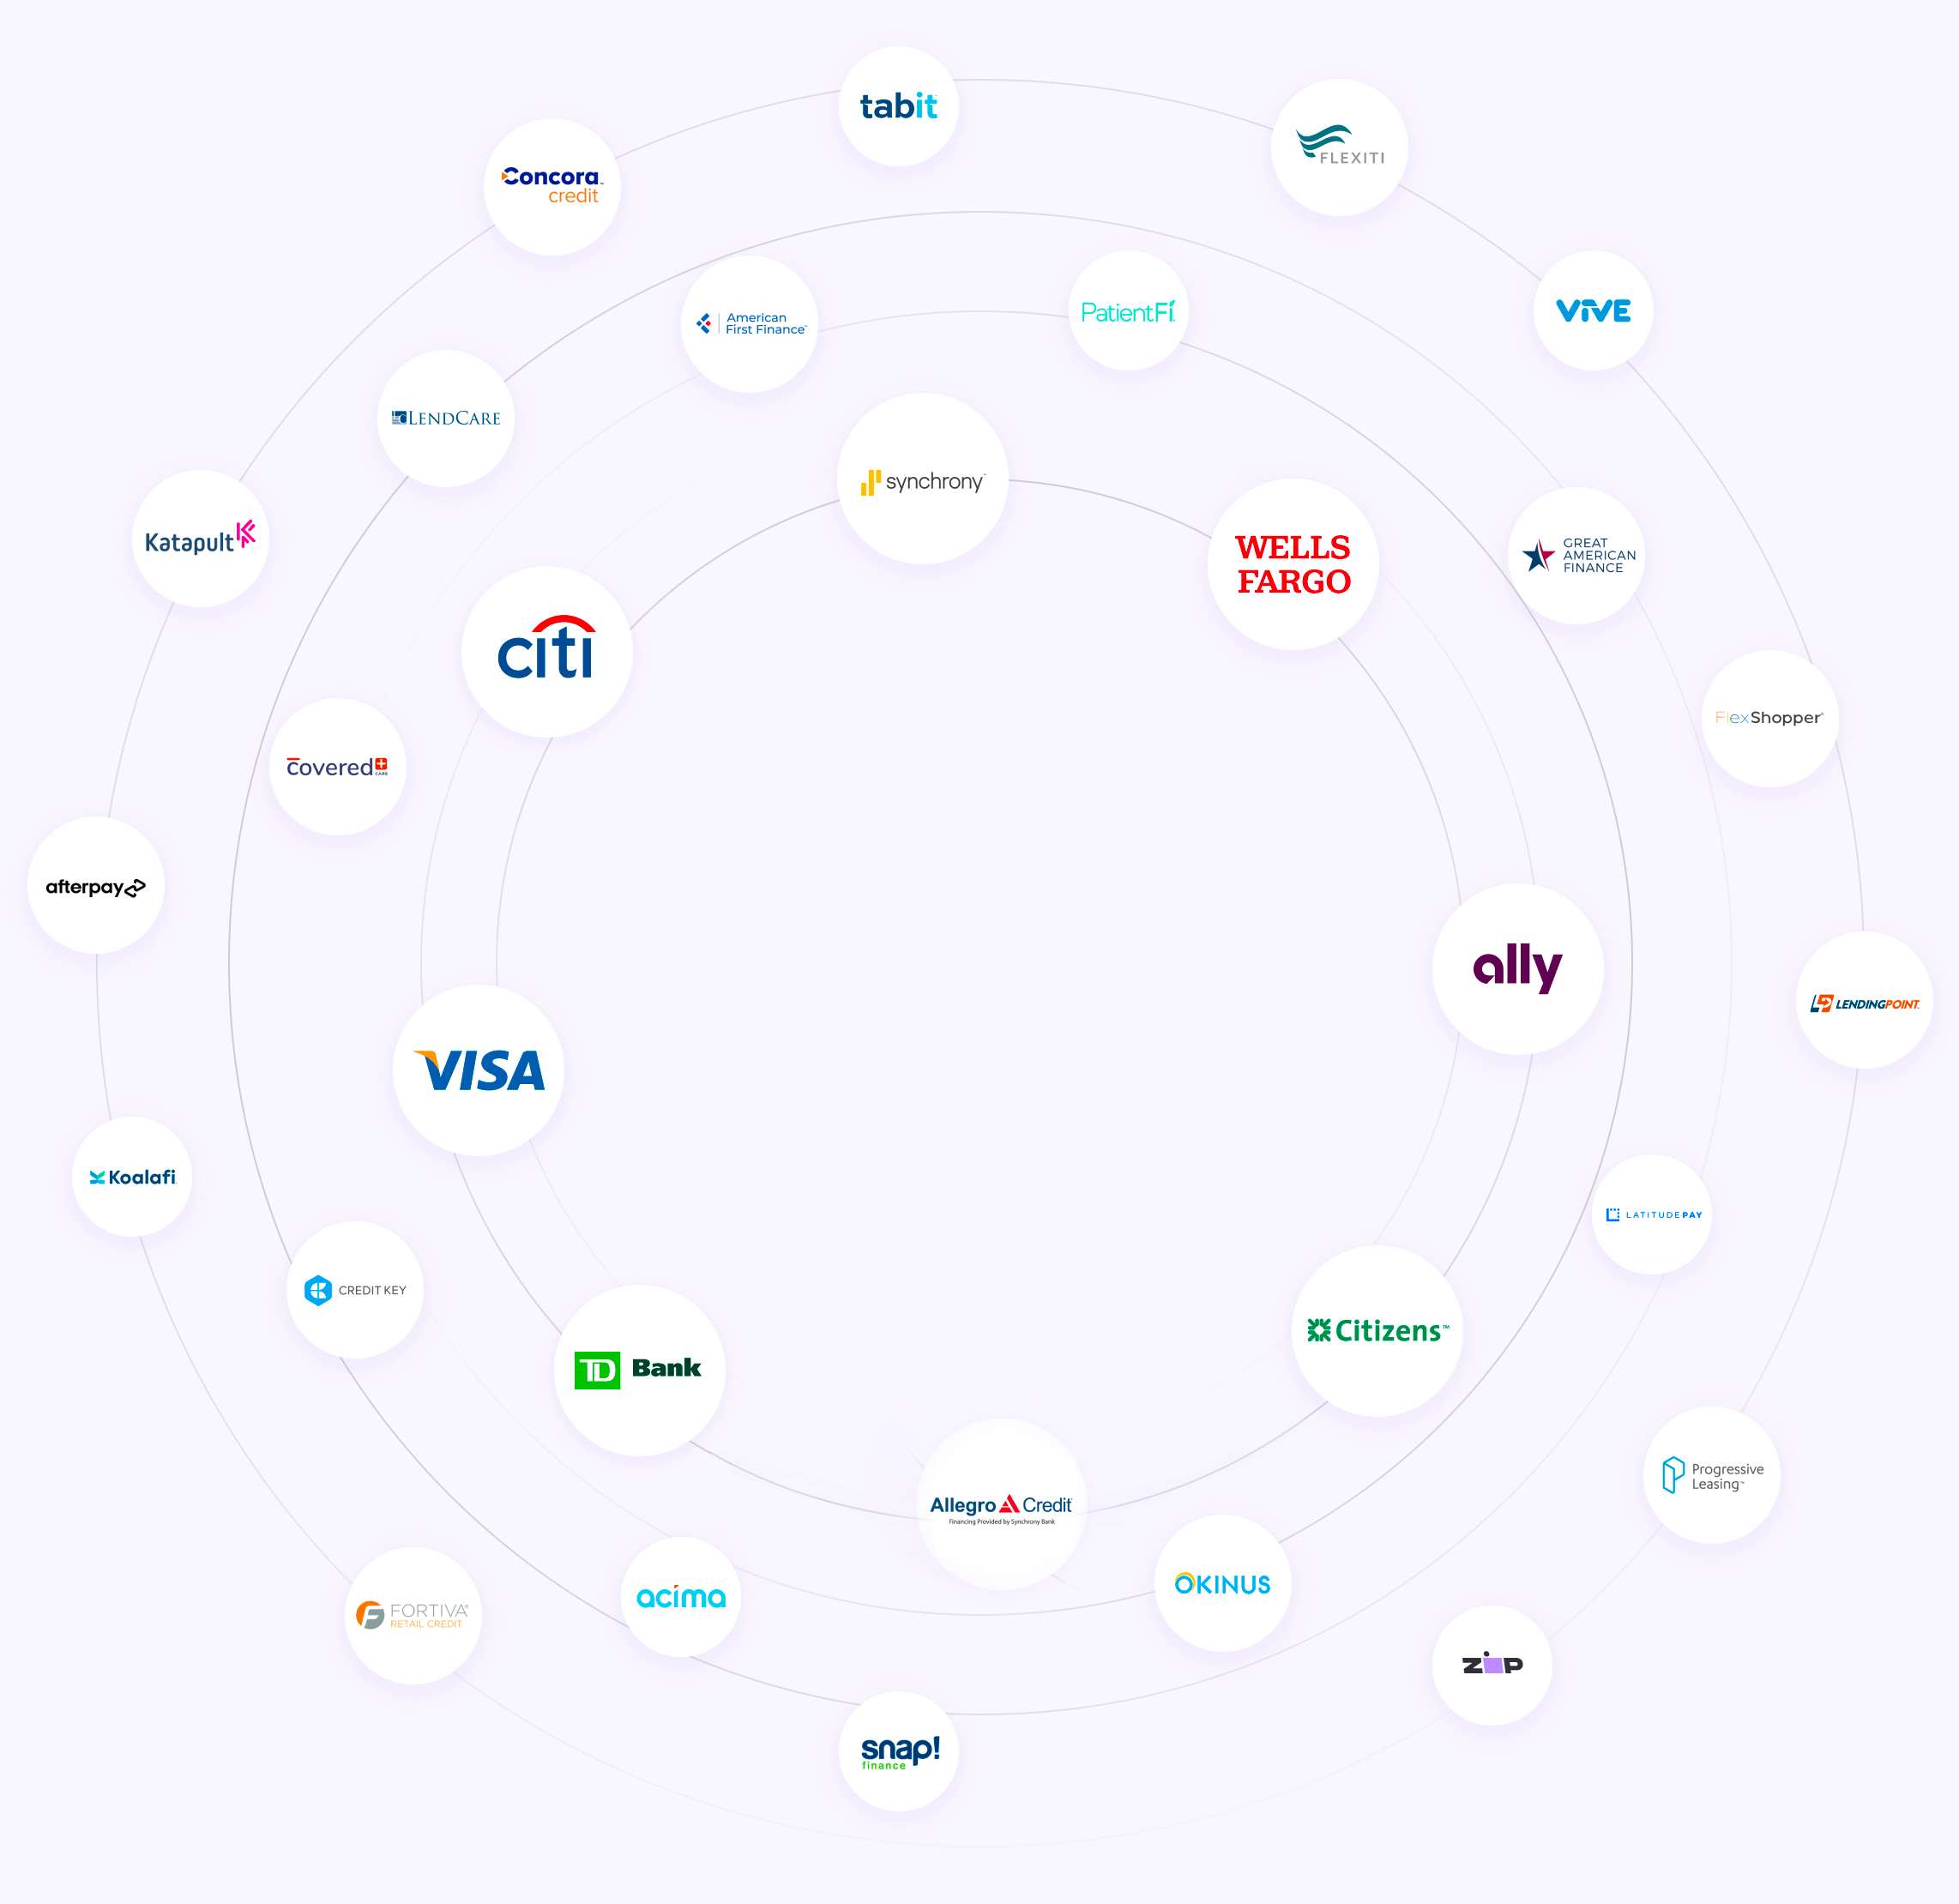 ChargeAfter embedded lending network: Citi, Visa, Wells Fargo, Synchrony, TD Bank, Citizens, Ally, and more